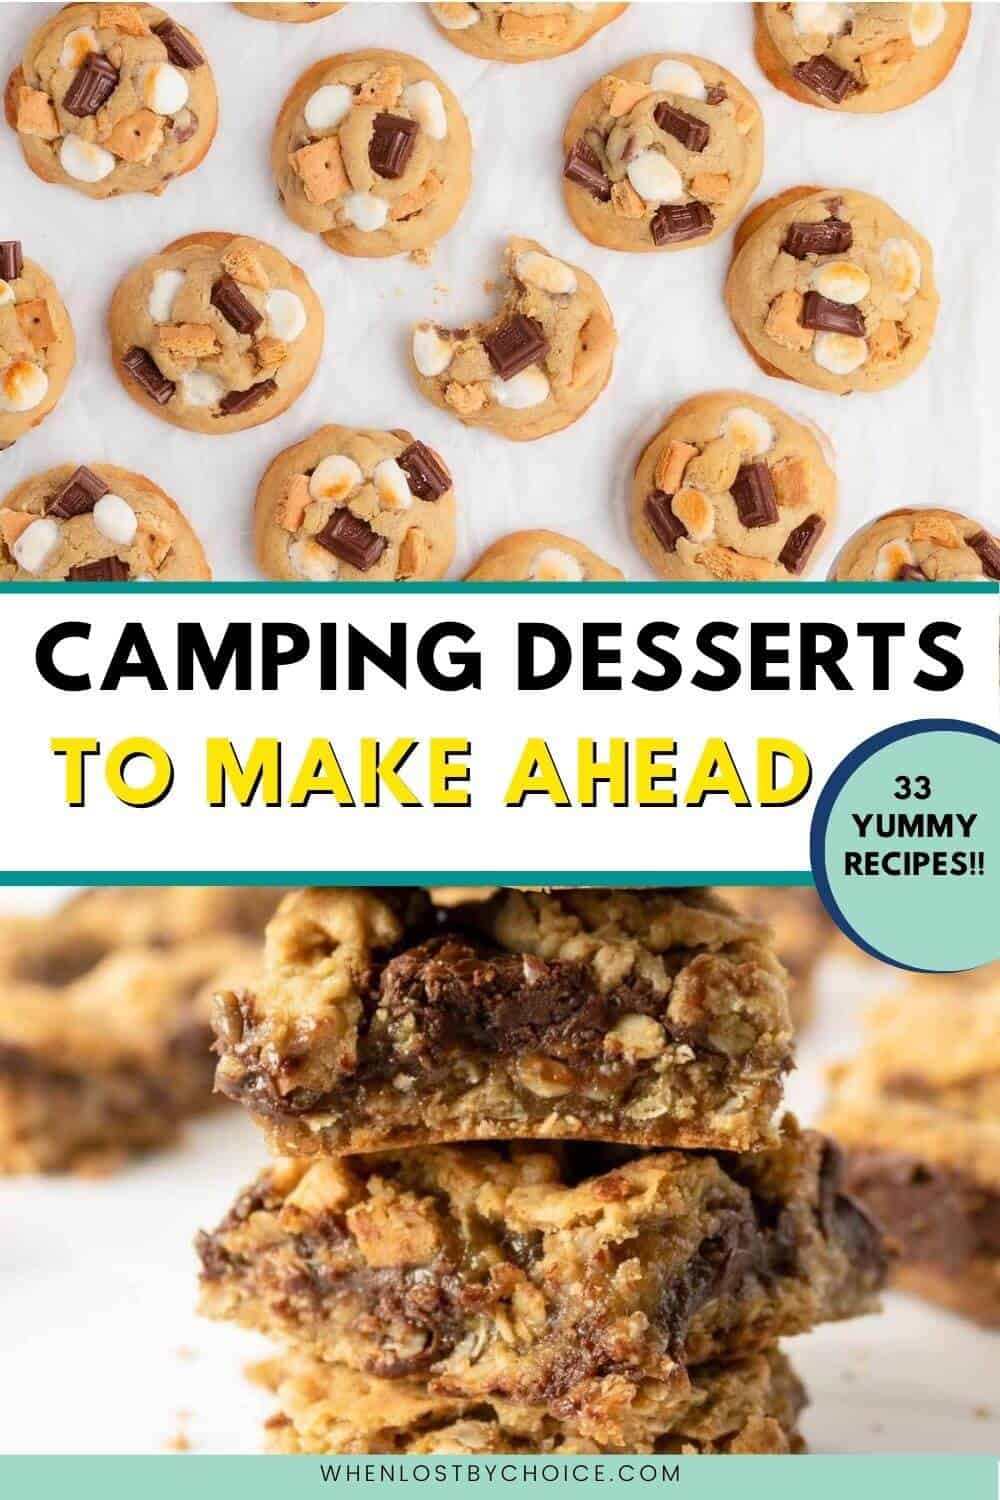 Pinterest image - text reads camping desserts to make ahead 33 yummy recipes